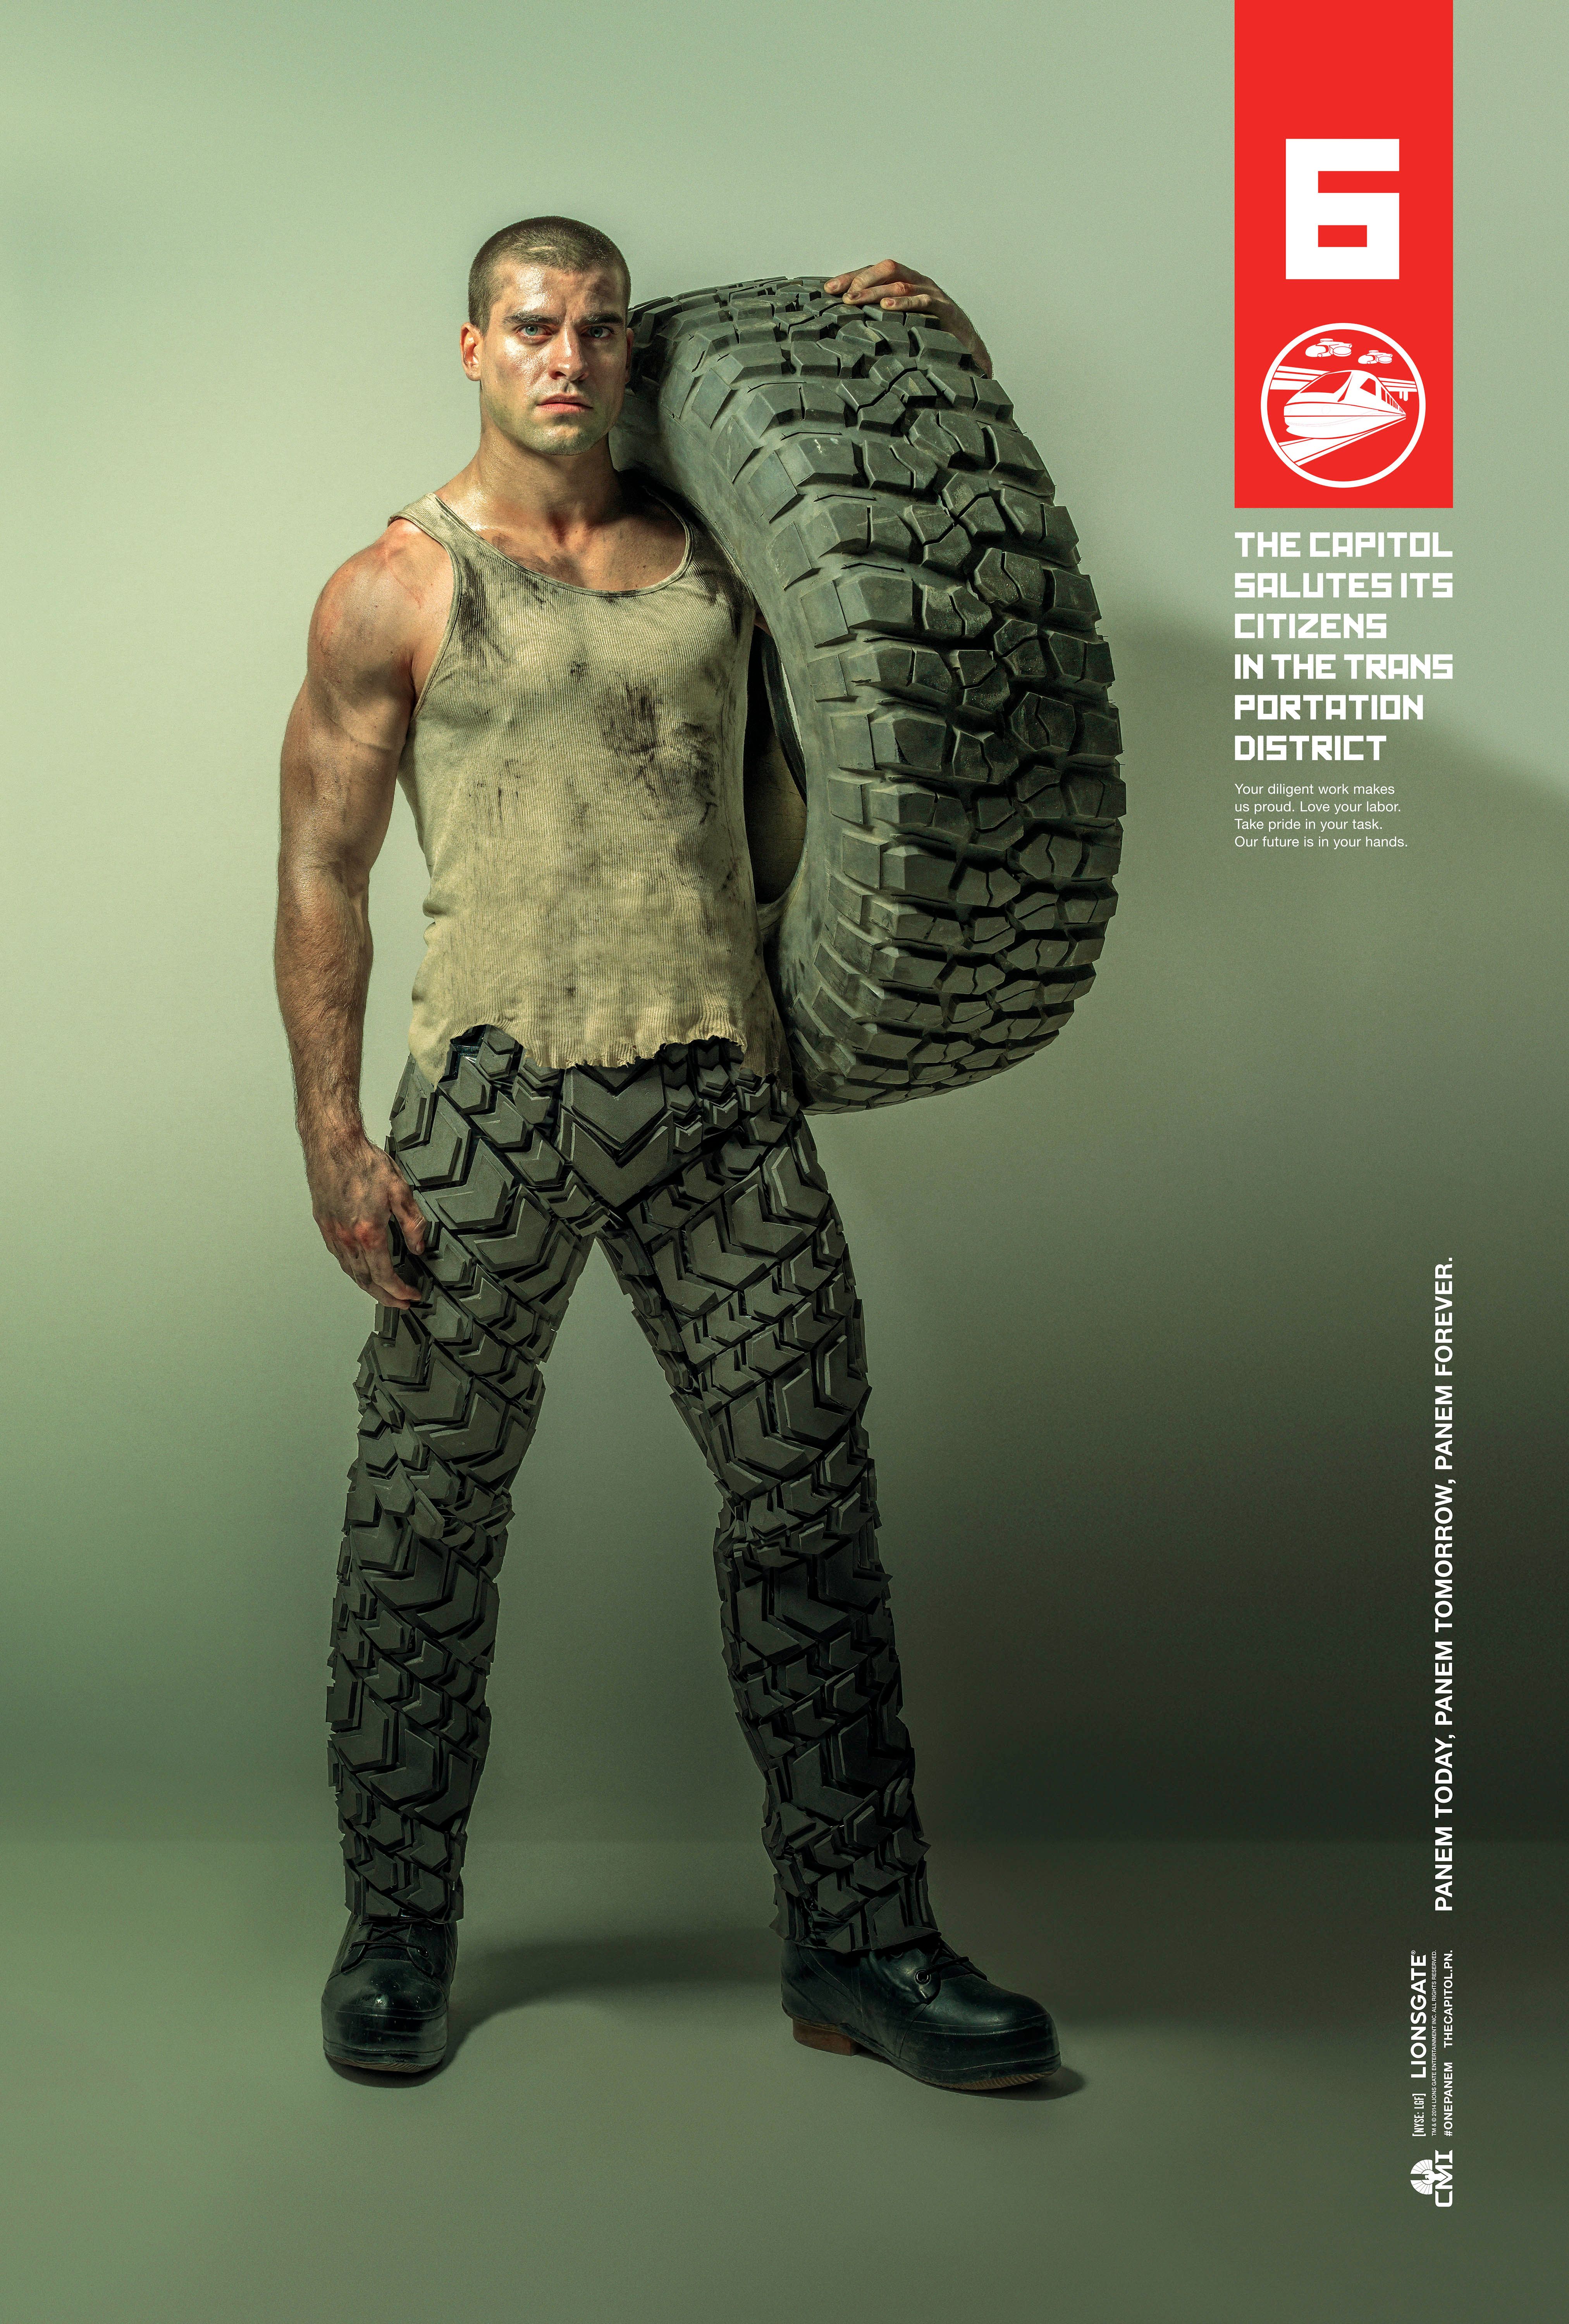 Hunger Games Mockingjay Posters Celebrate District Heroes & Odd Fashion